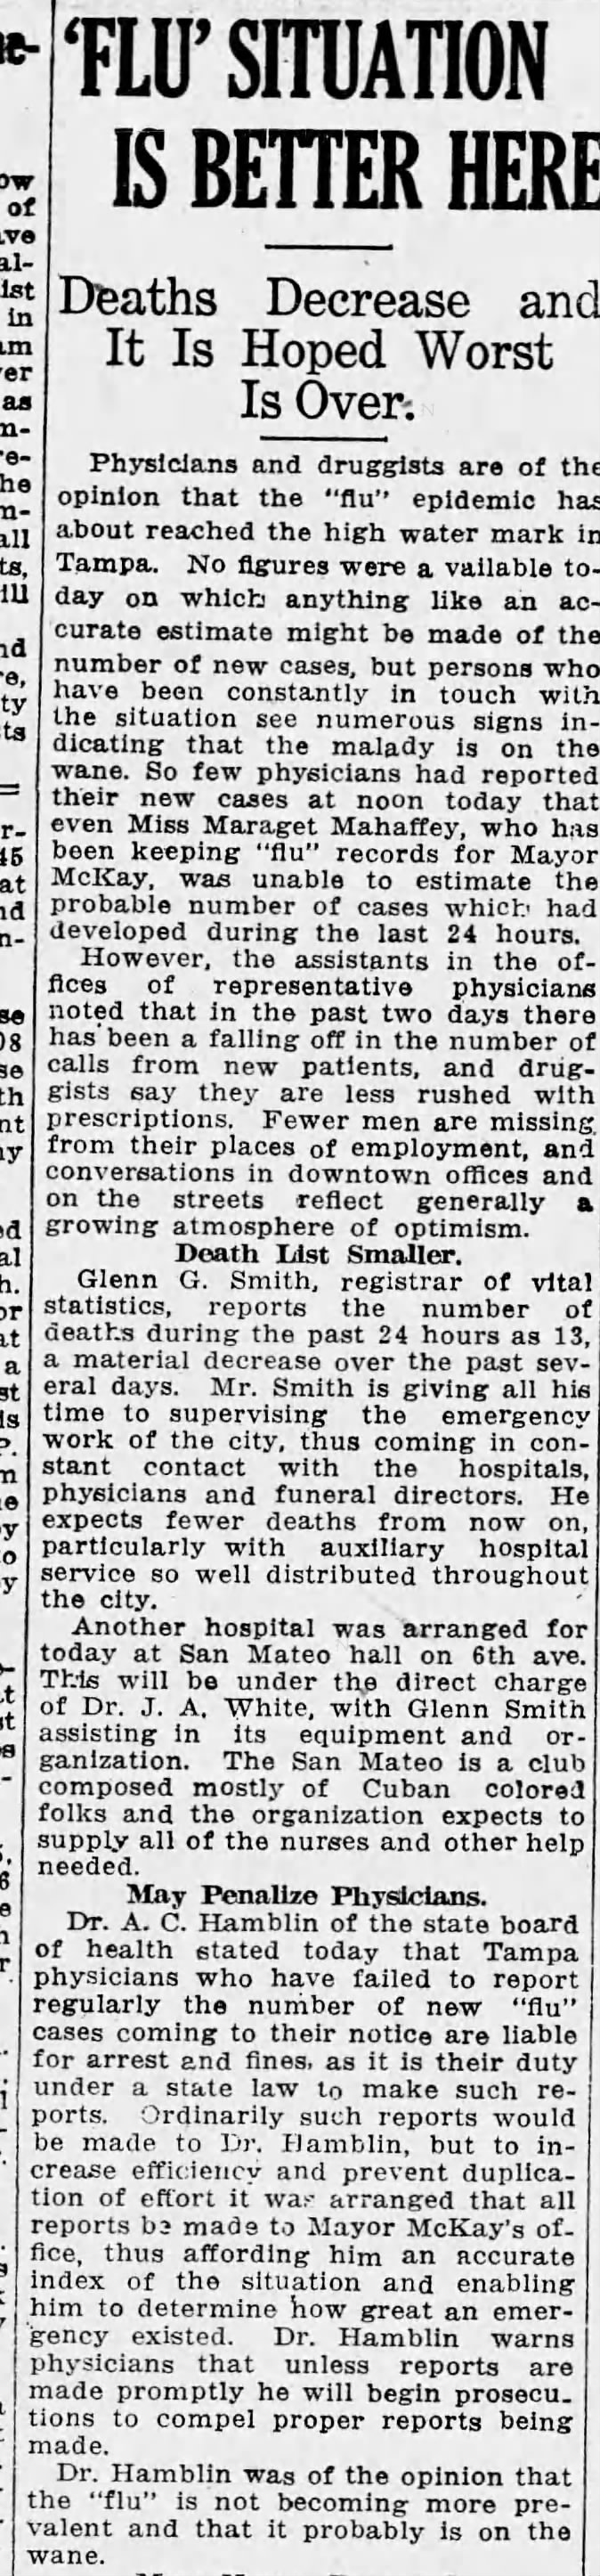 Newspaper says "flu situation is better" in Tampa, Florida, on Oct 25, 1918; Fewer deaths reported